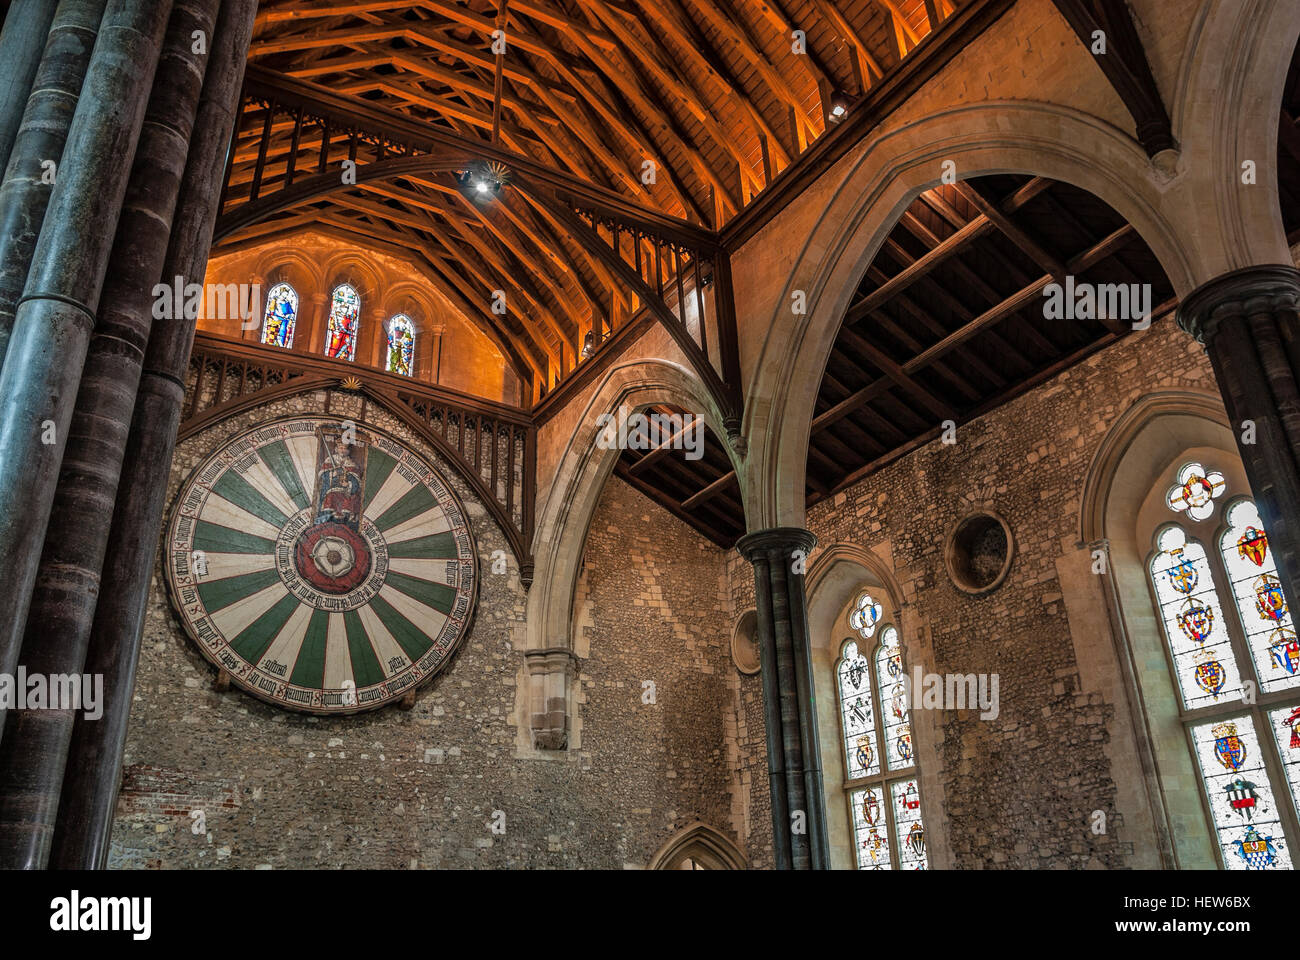 The Great Hall of Winchester, England, where the legendary round table of King Artus was located. Stock Photo